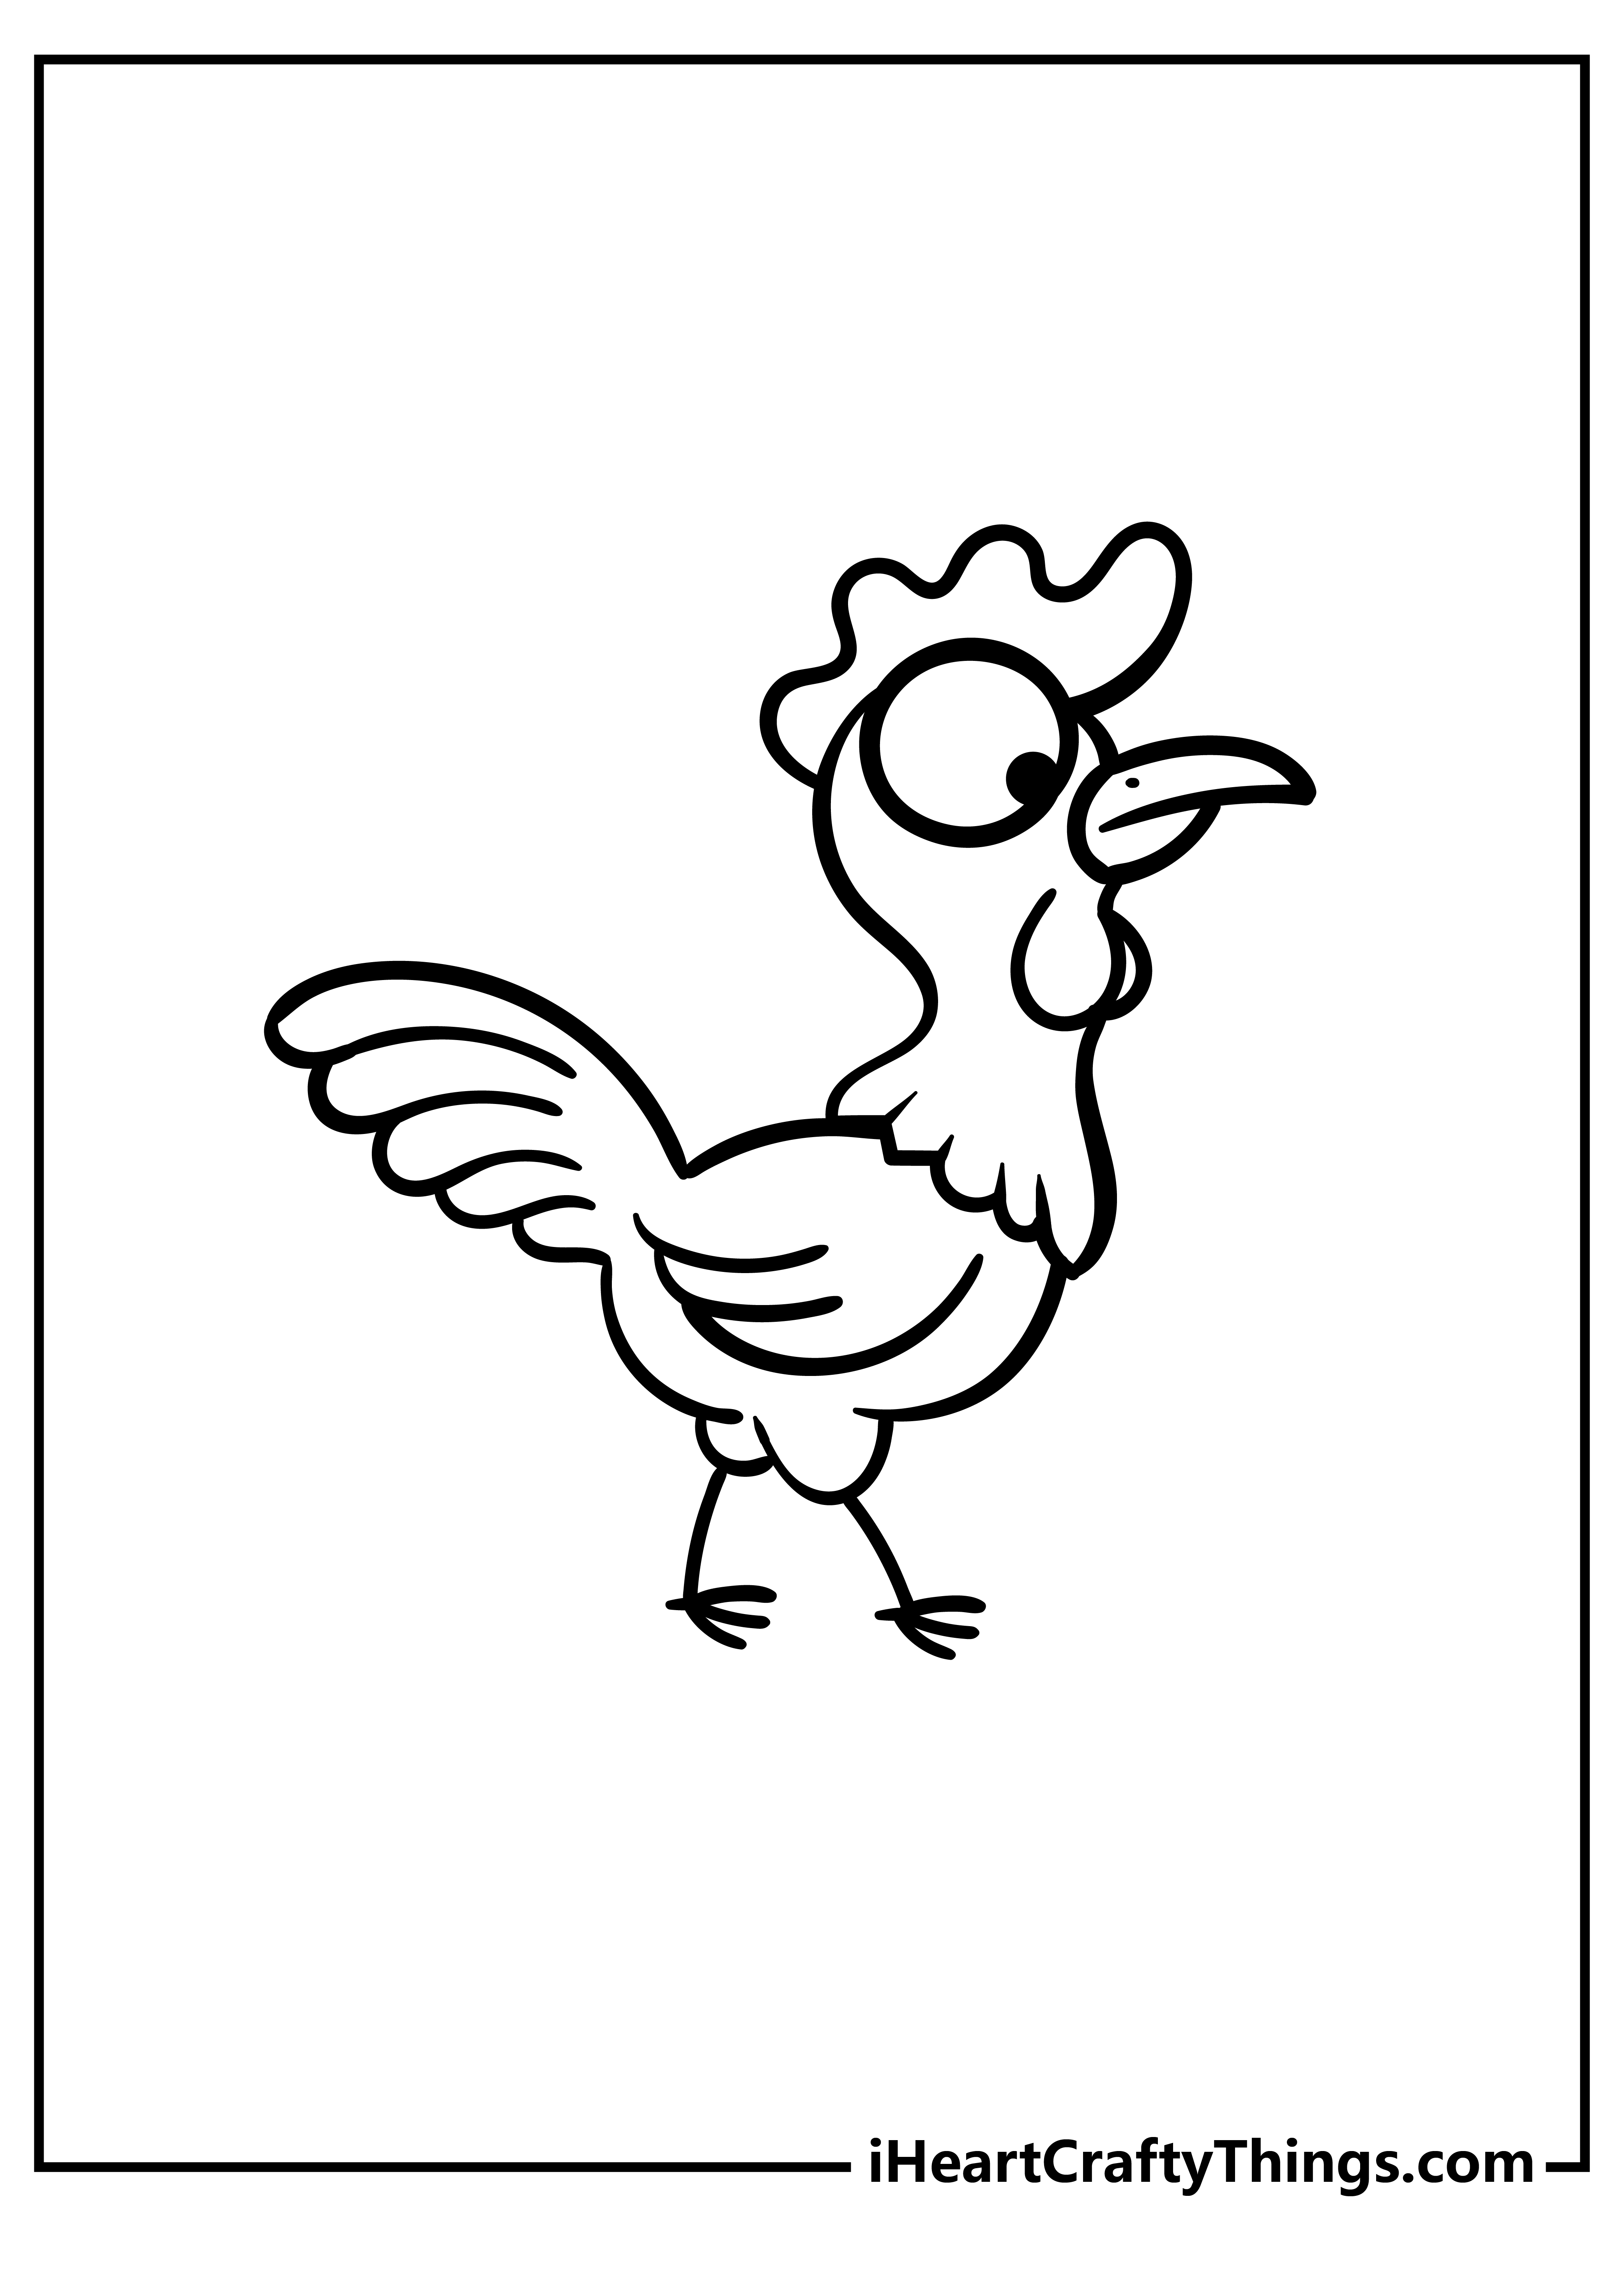 Chicken Coloring Pages for preschoolers free printable